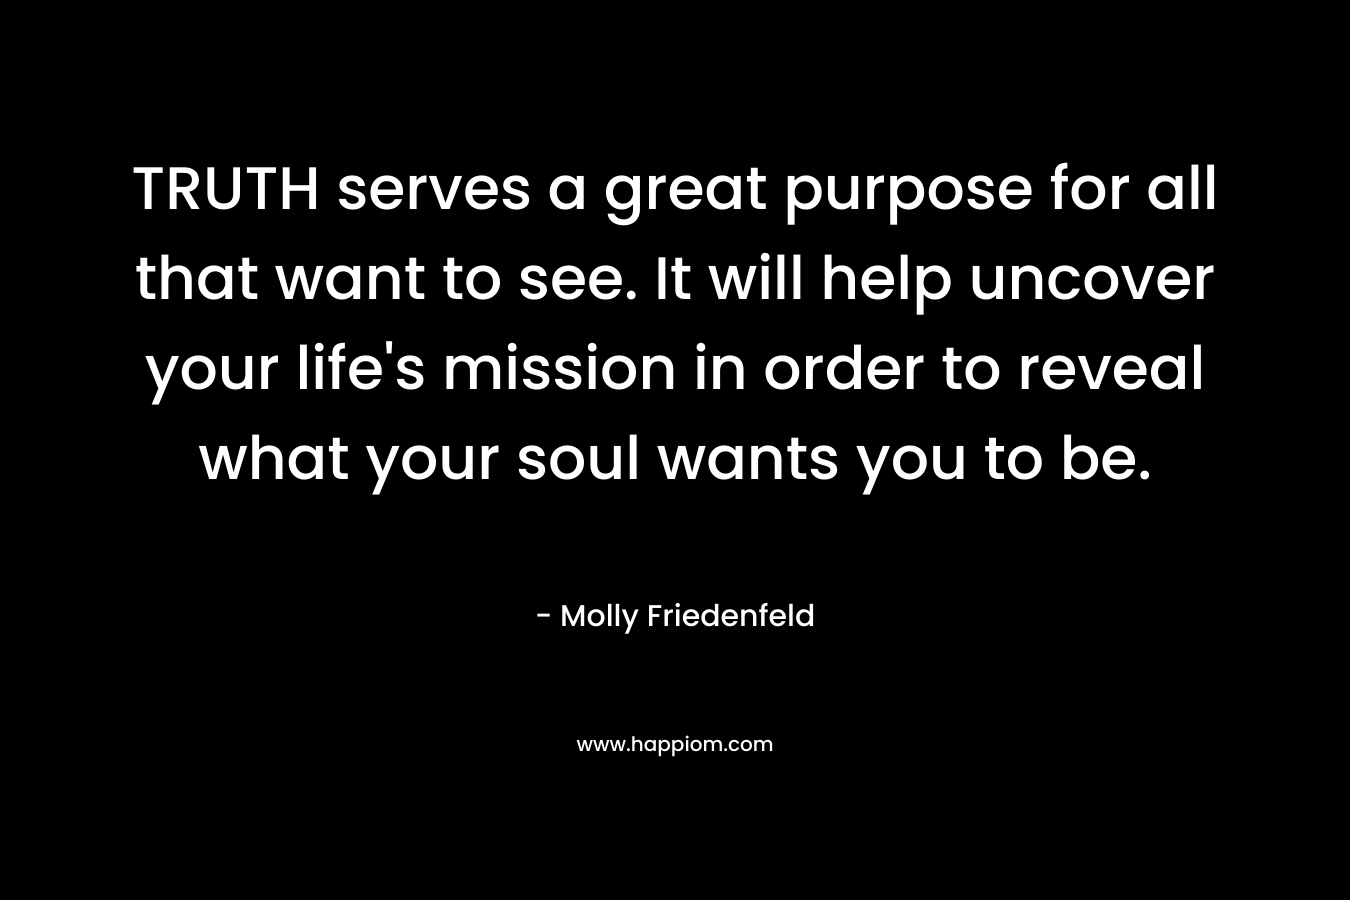 TRUTH serves a great purpose for all that want to see. It will help uncover your life’s mission in order to reveal what your soul wants you to be. – Molly Friedenfeld